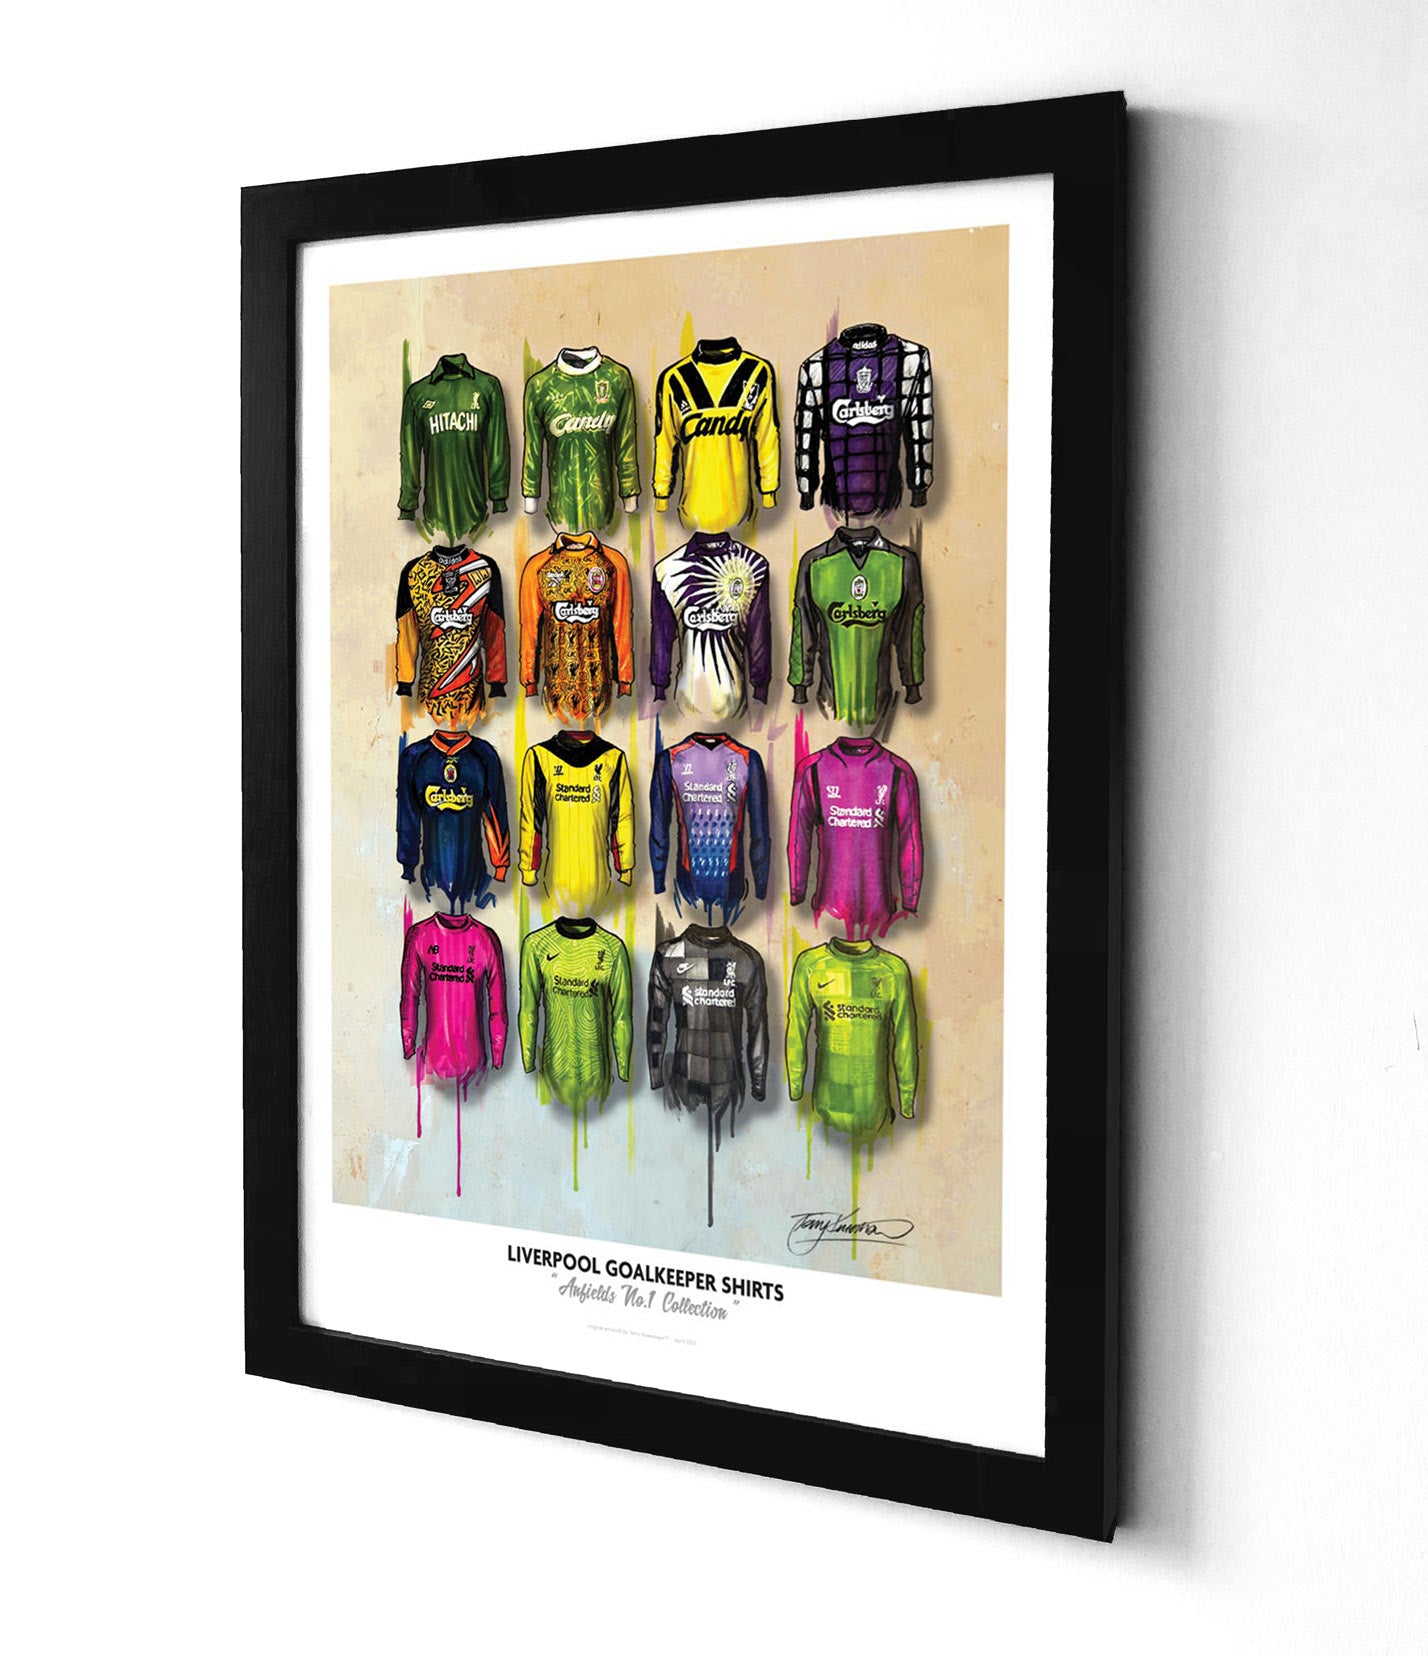 limited edition A2 prints by Terry Kneeshaw showcase his artwork featuring 16 different Liverpool Football Club Goal Keeper jerseys throughout the years